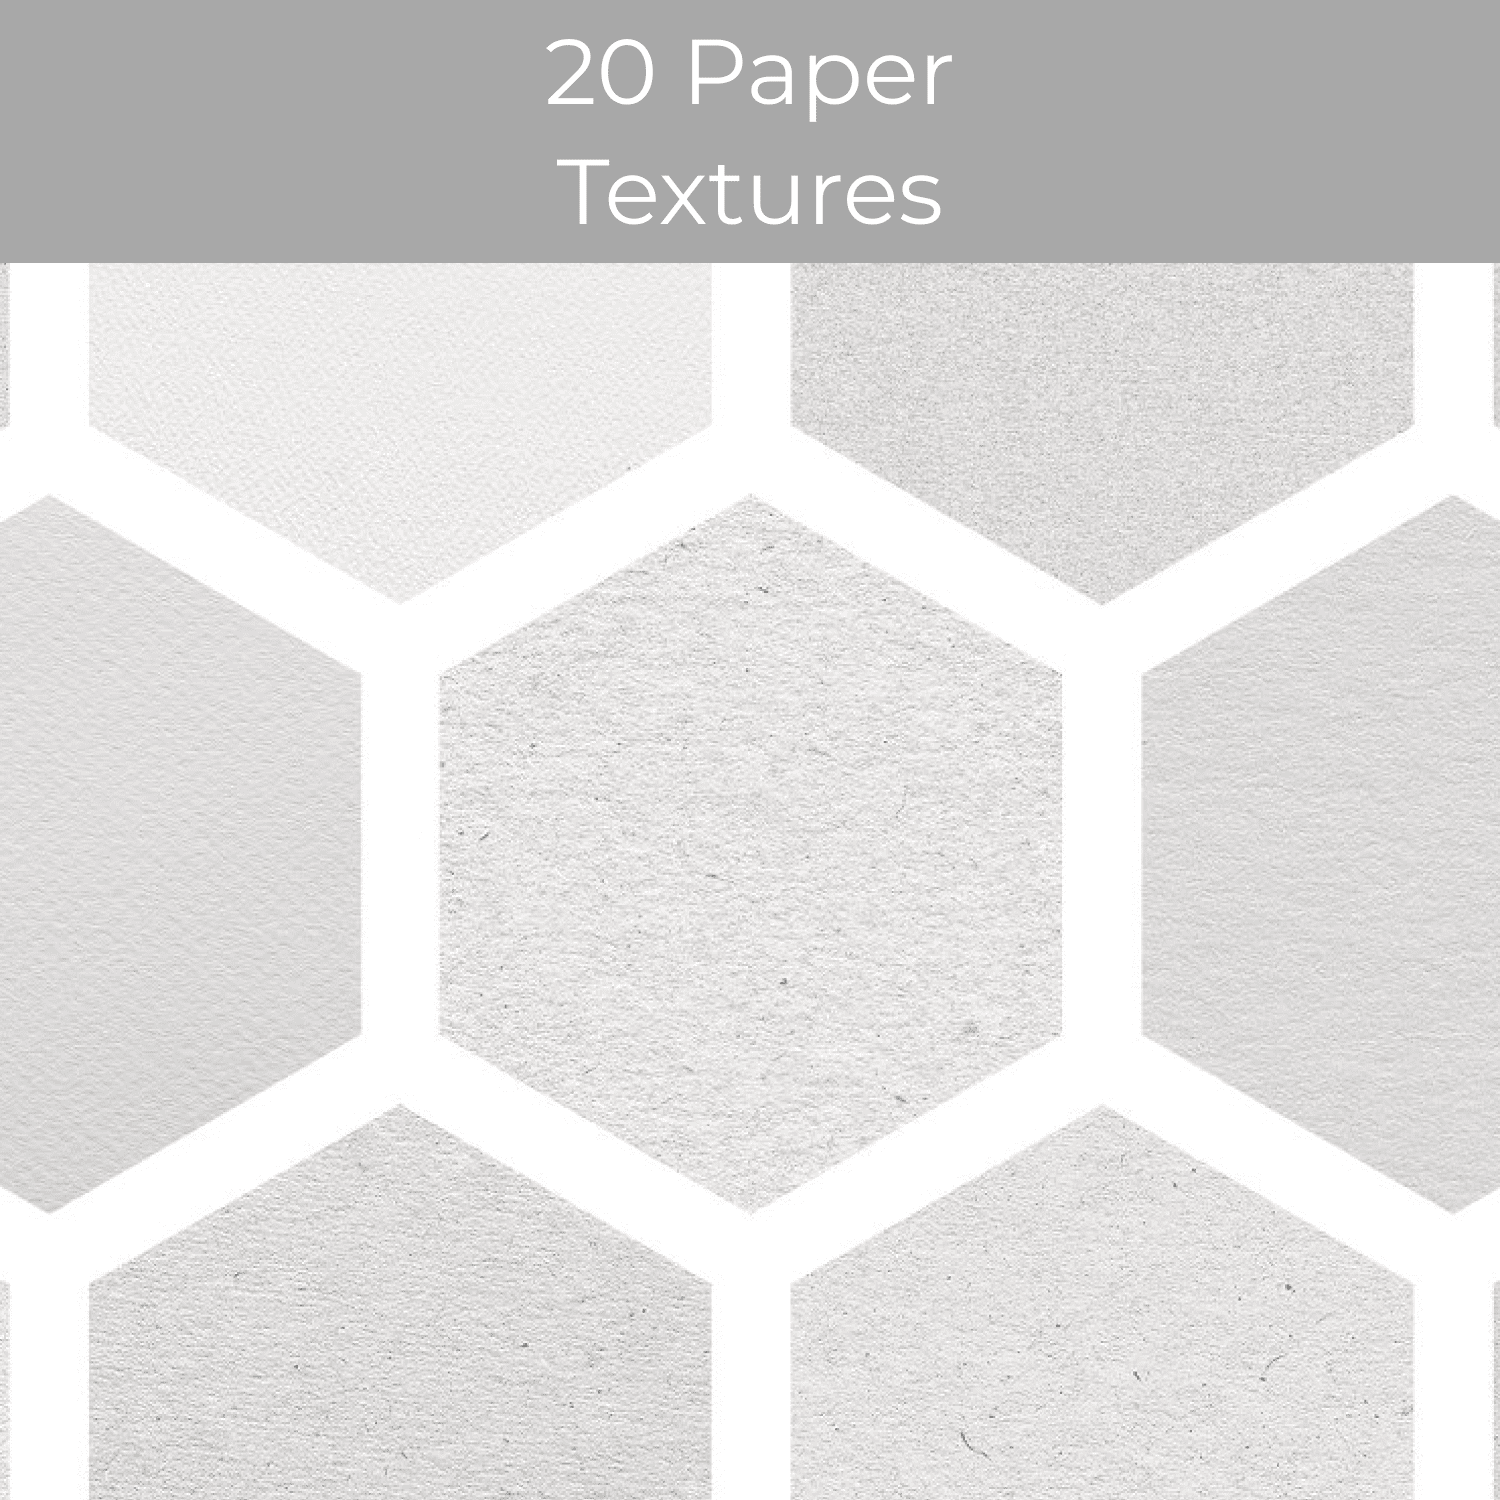 20 Paper Textures cover.